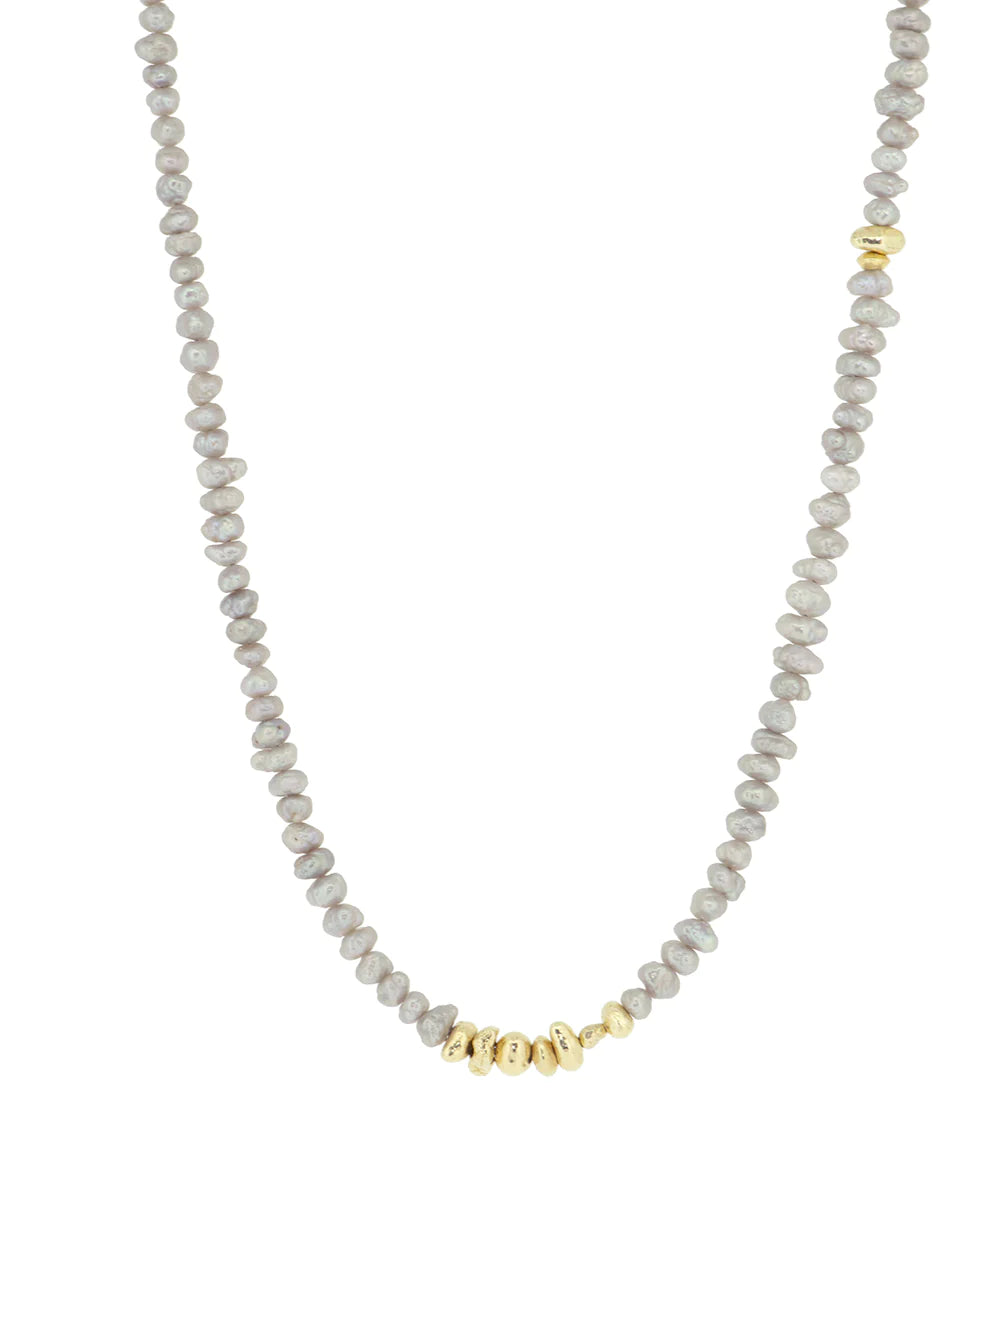 THE SHOW necklace - GREY PEARLS GP 14K